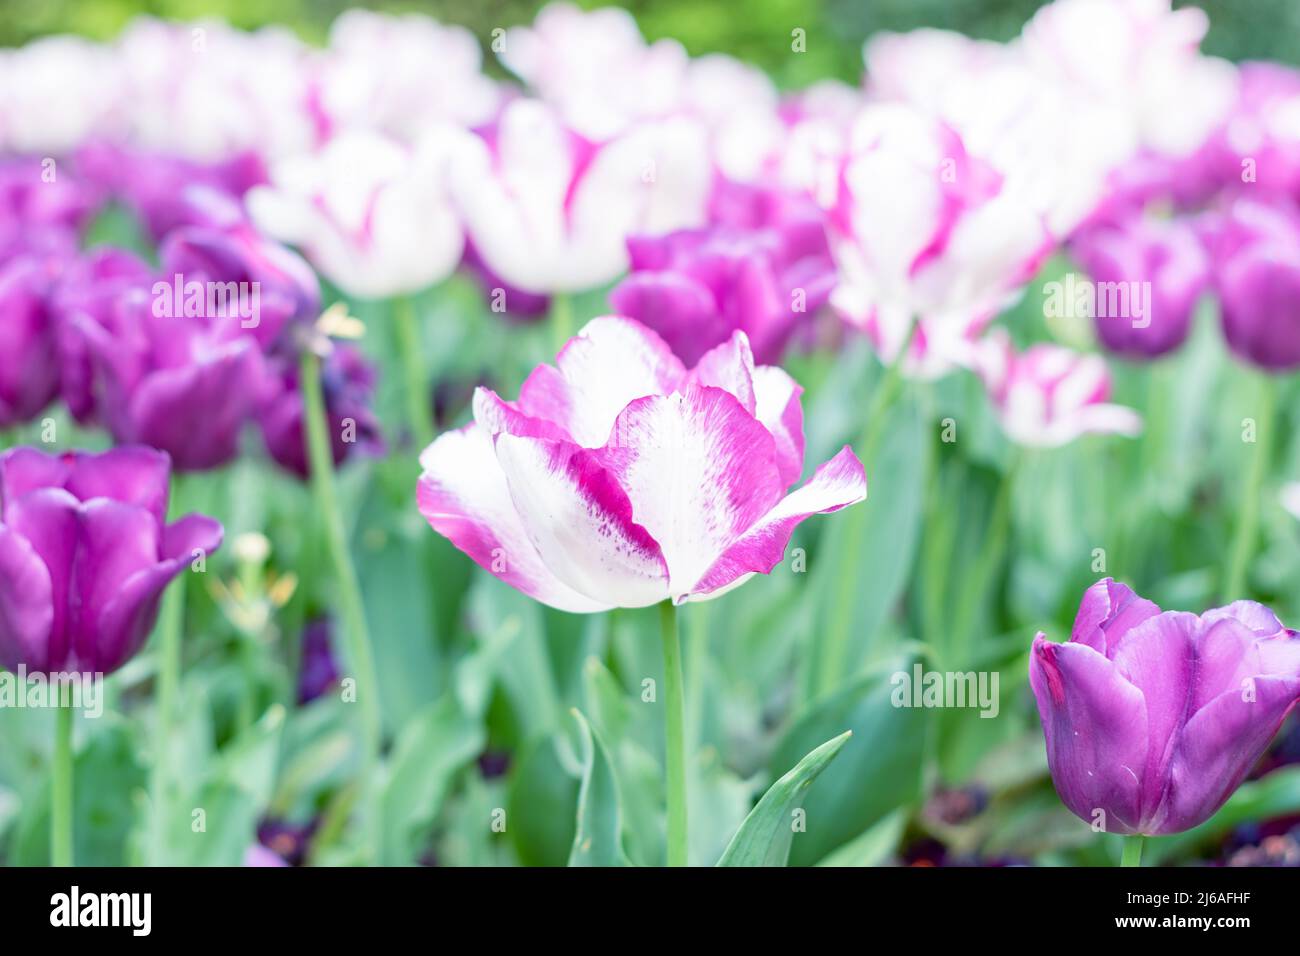 White purple tulip flower background. Blooming tulips field. Tulips flowers against day sun light. Selective focus Stock Photo